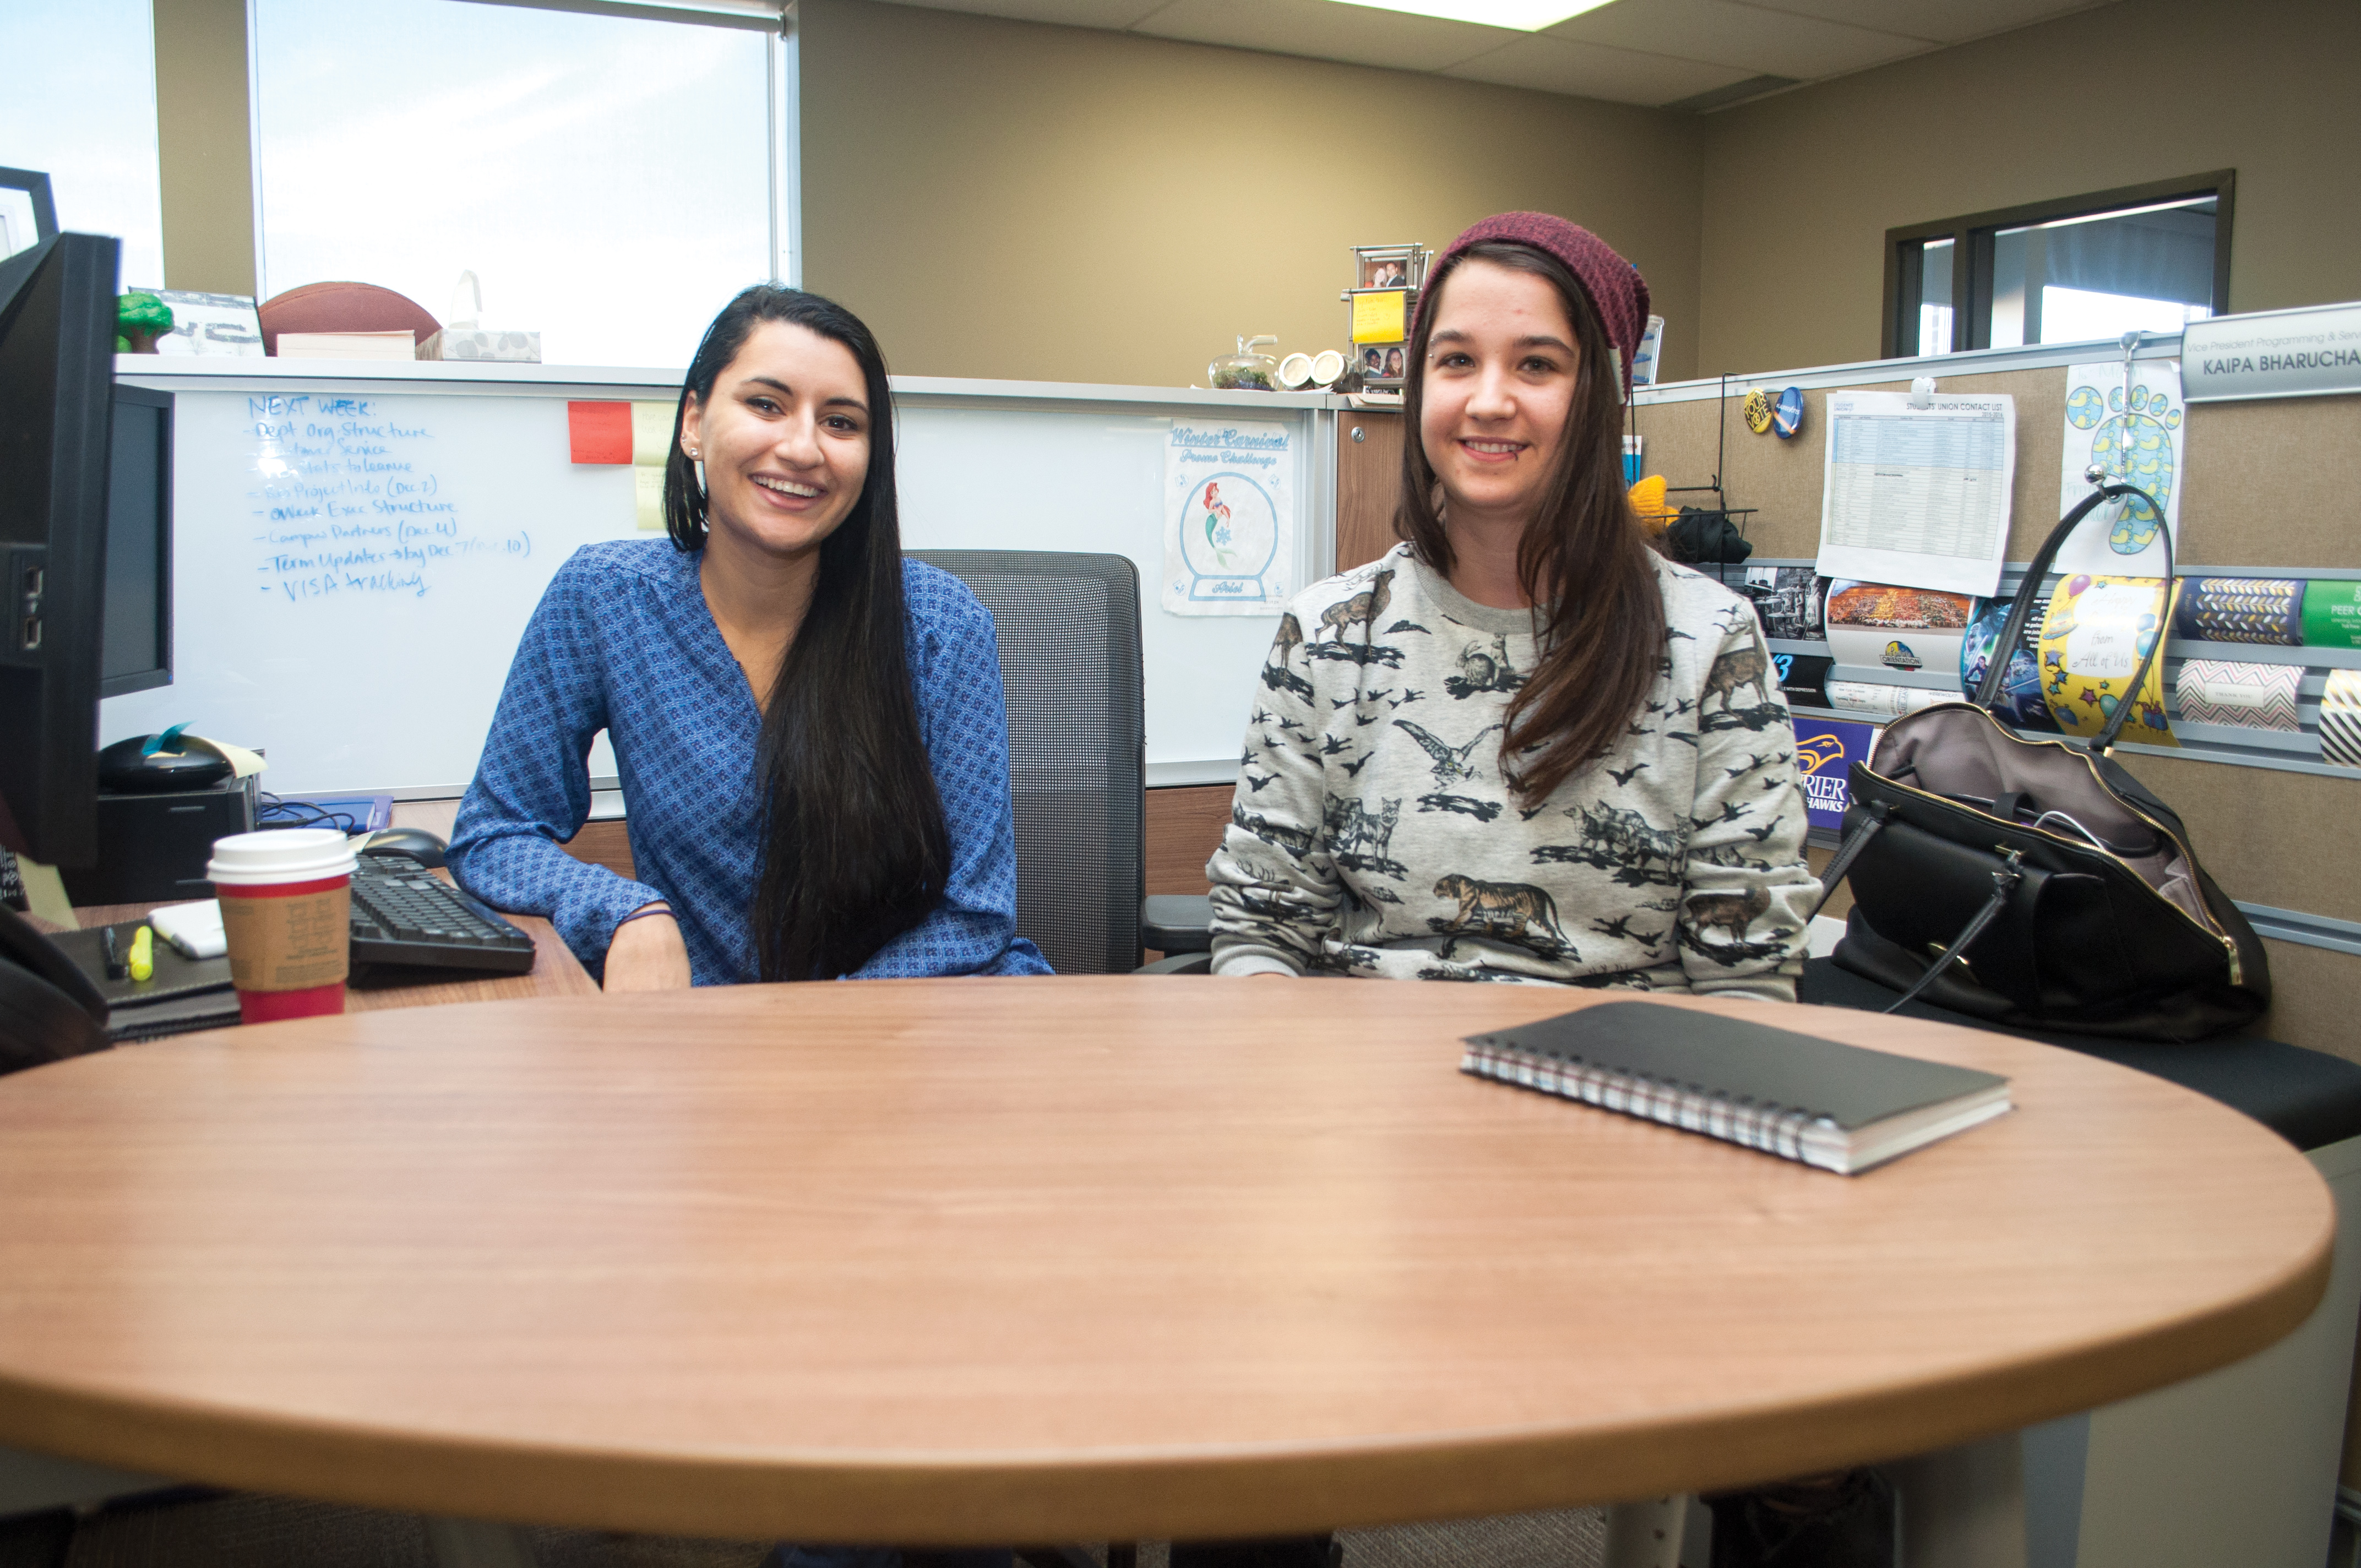 Wilfrid Laurier’s on-campus resources, such as the Student Wellness Centre and Peer Connect, are committed to helping students with issues of stress and depression during the exam period. 